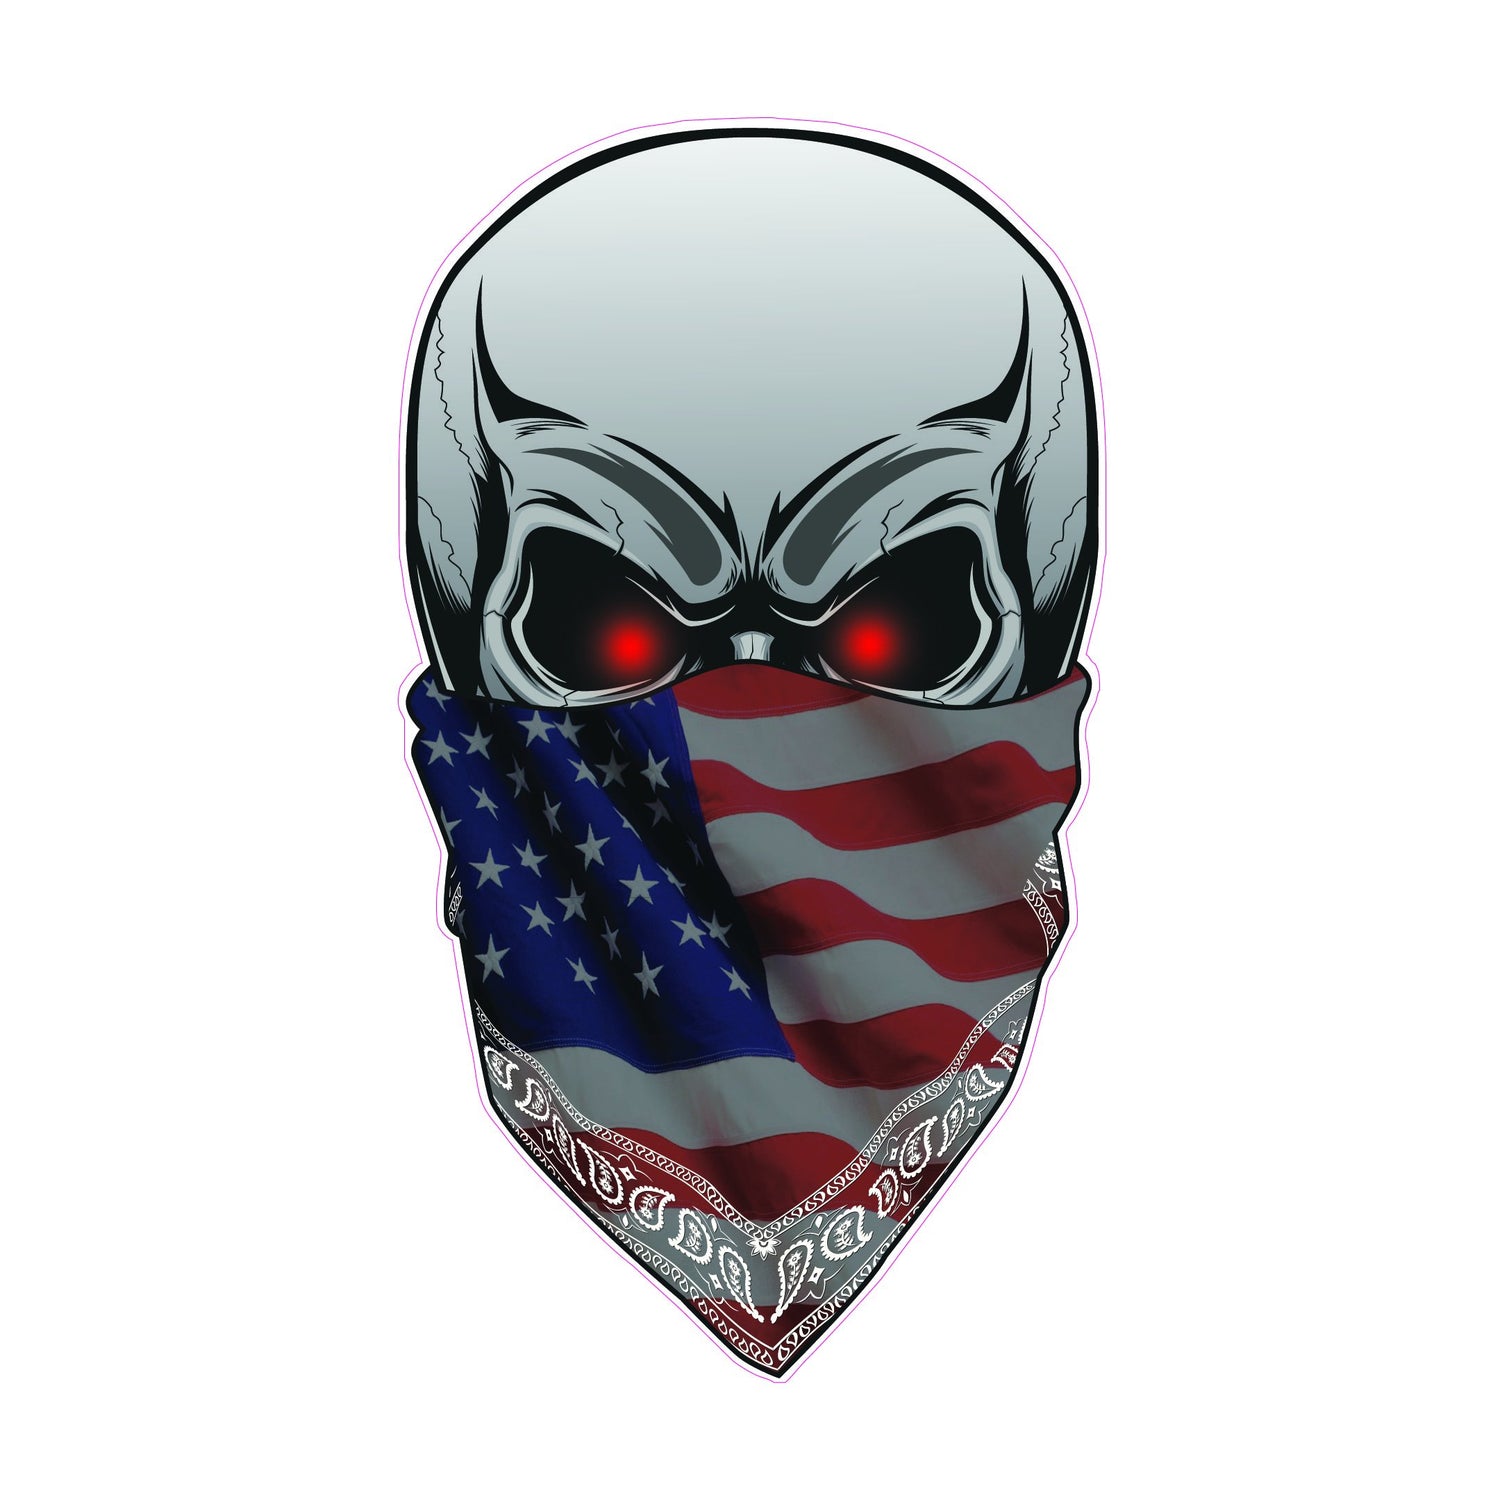 Skull with American Flag Bandanna Decal - automotive decals, automotive stickers, First responders Law Enforcement decals, god will judge, Military and Veterans Decals, Punisher decal, Punisher sticker, skull american flag, skull decal, Skull with American Flag Bandanna Decal, vehicle decals, Vehicle stickers, window decal, window decals, window sticker, window stickers, woo_import_1 | American Patriots Decals | High Quality Military and Veterans Die-Cut Decals